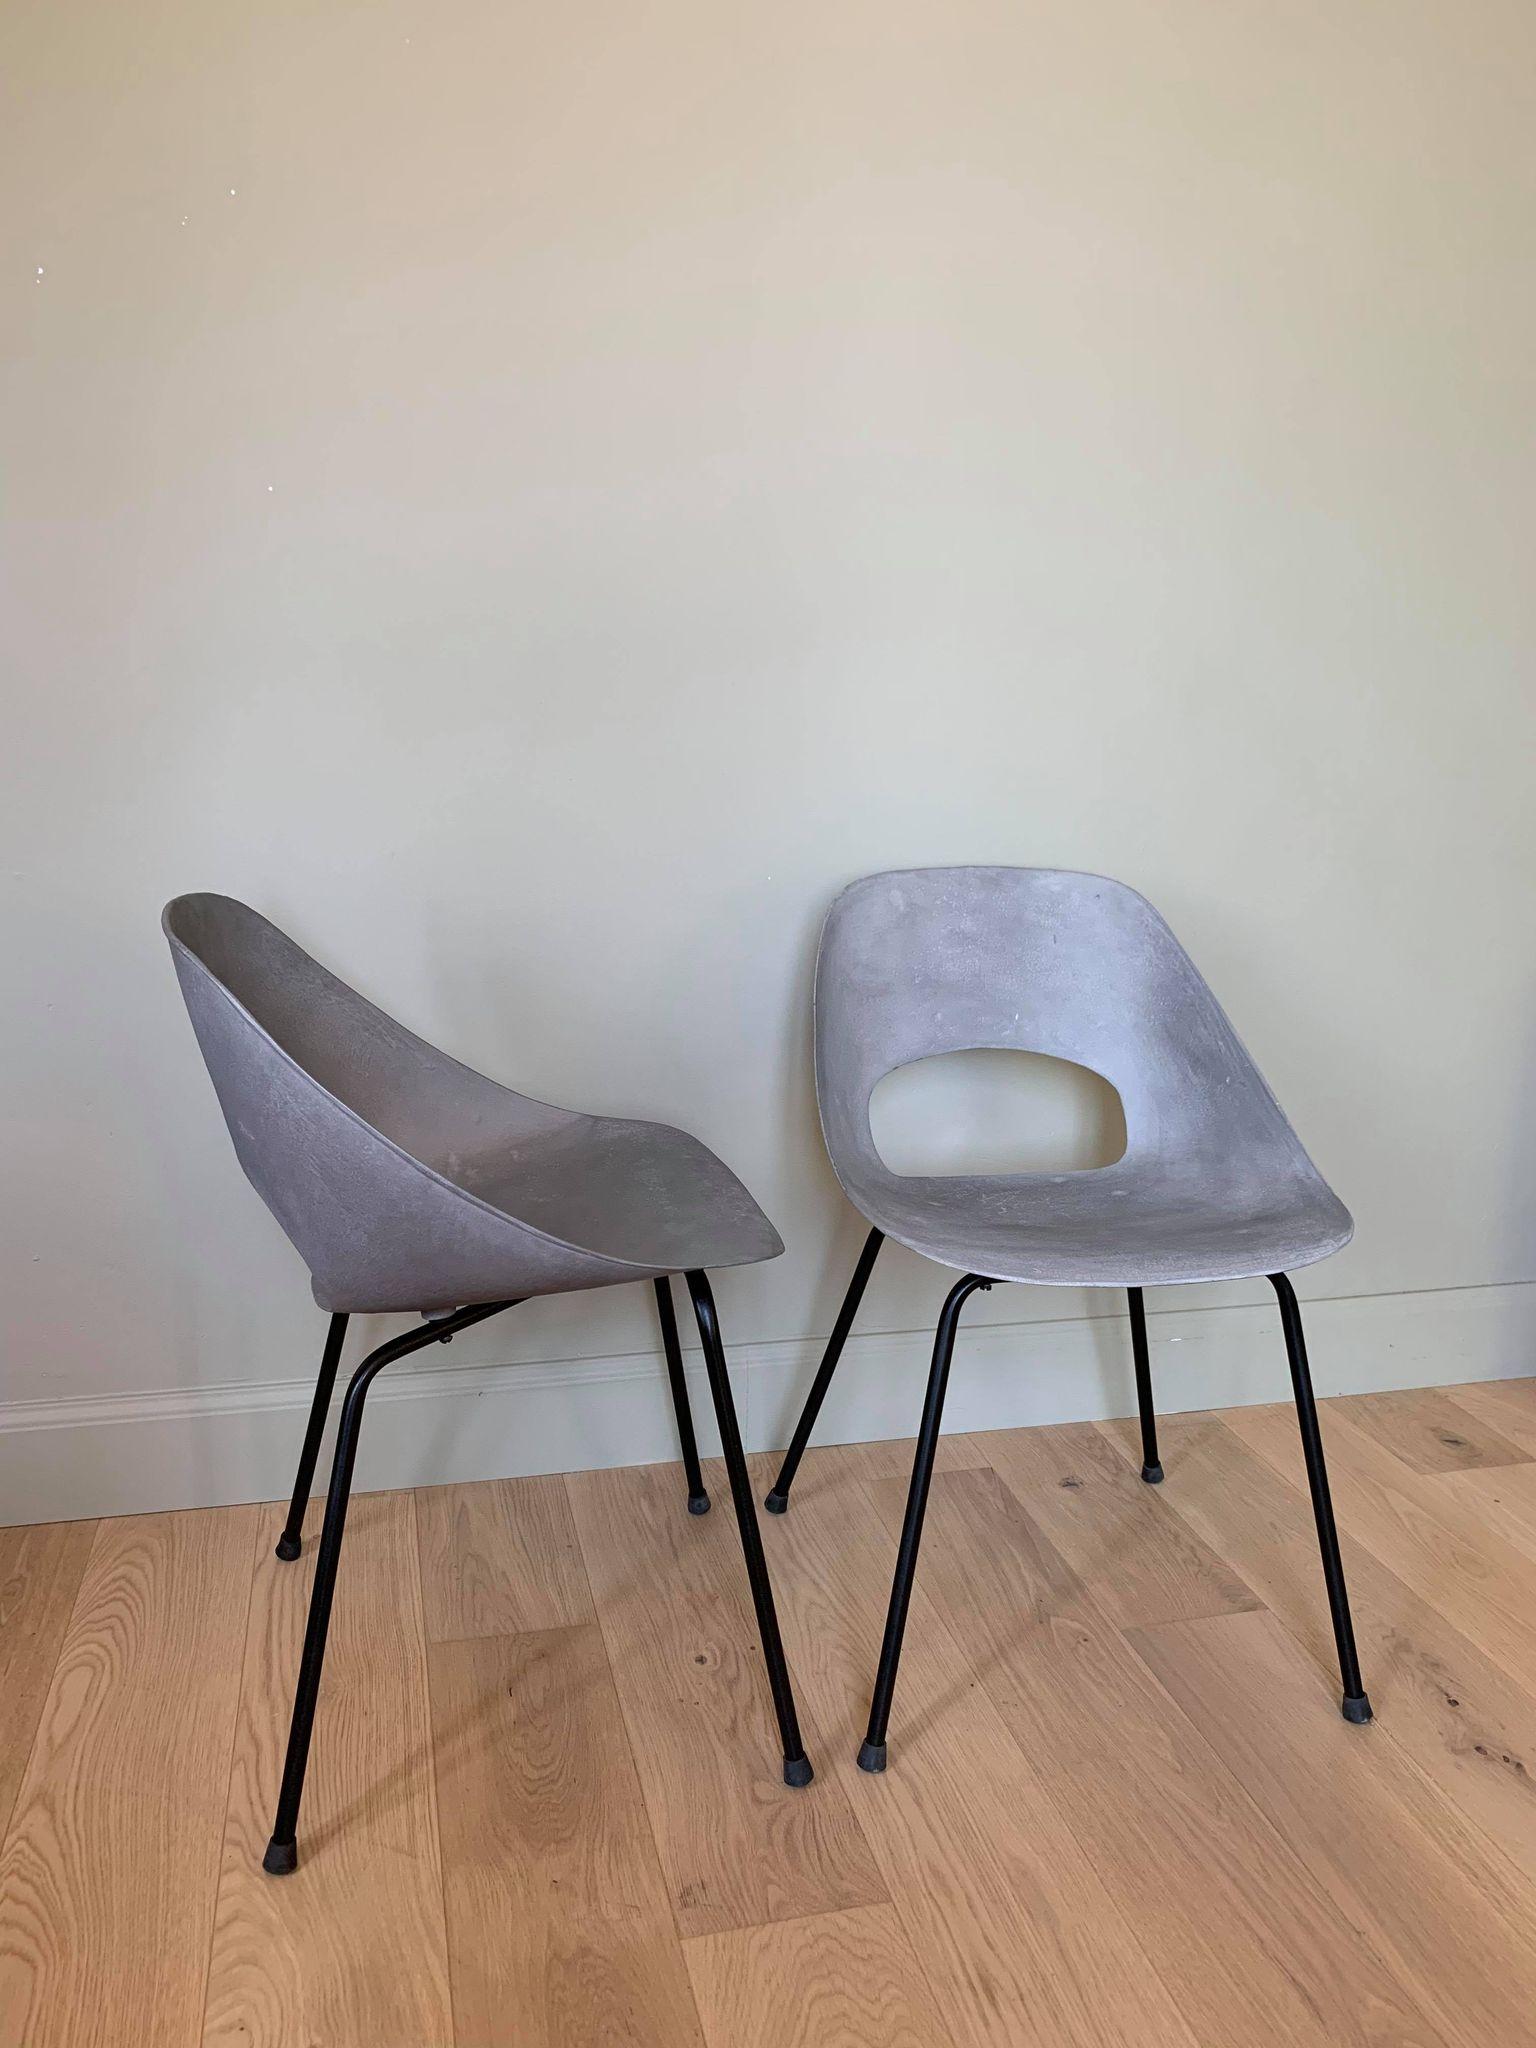 Pair of Mid-Century Aluminium Chairs by Pierre Guariche for Steiner, France 1953 3